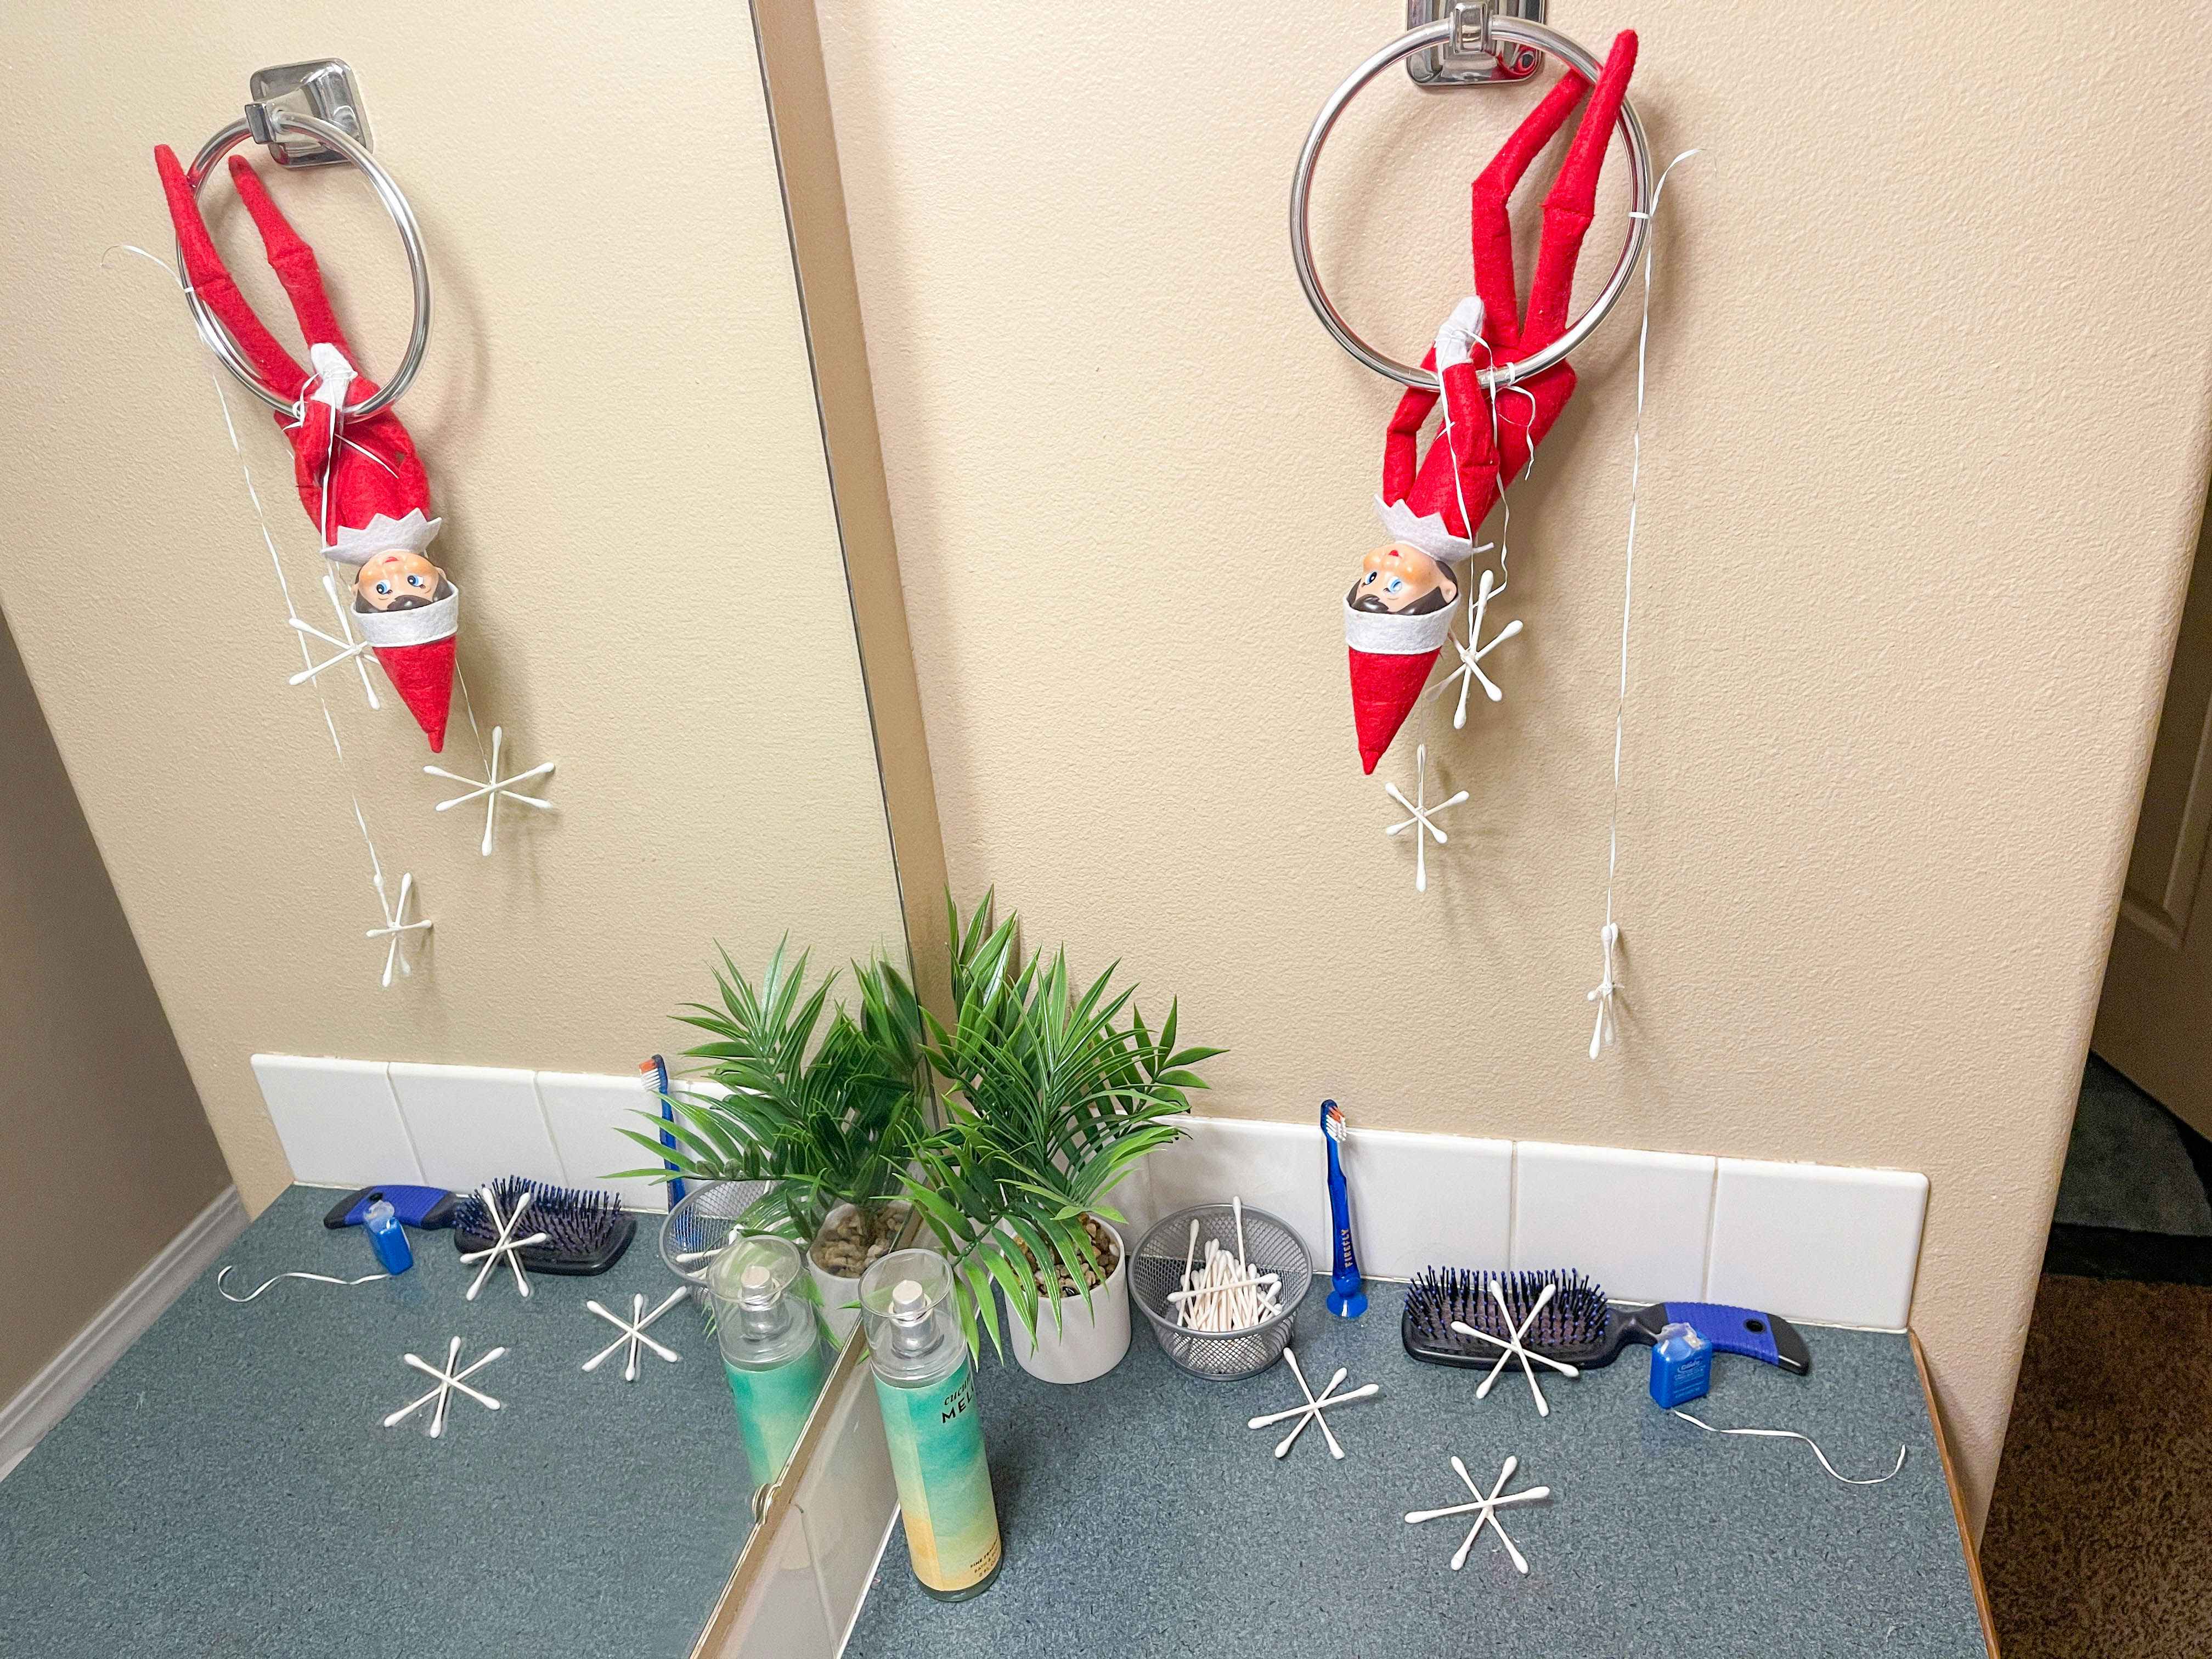 an elf on the shelf doll hanging upside down on towel ring in bathroom with qtip snowflakes around counter